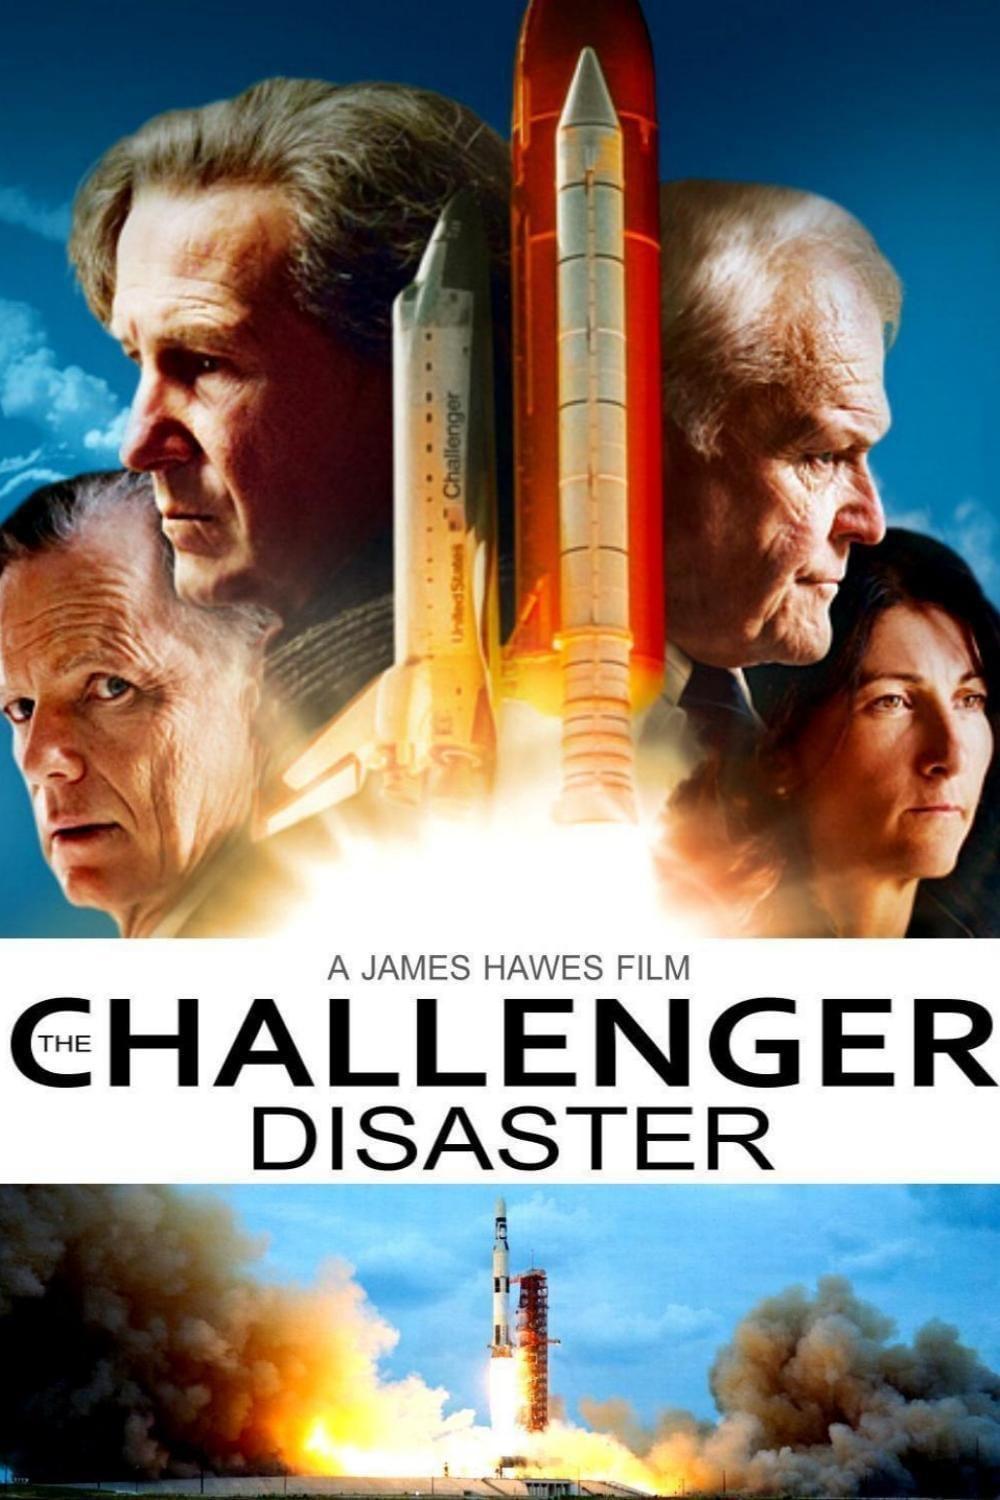 The Challenger poster